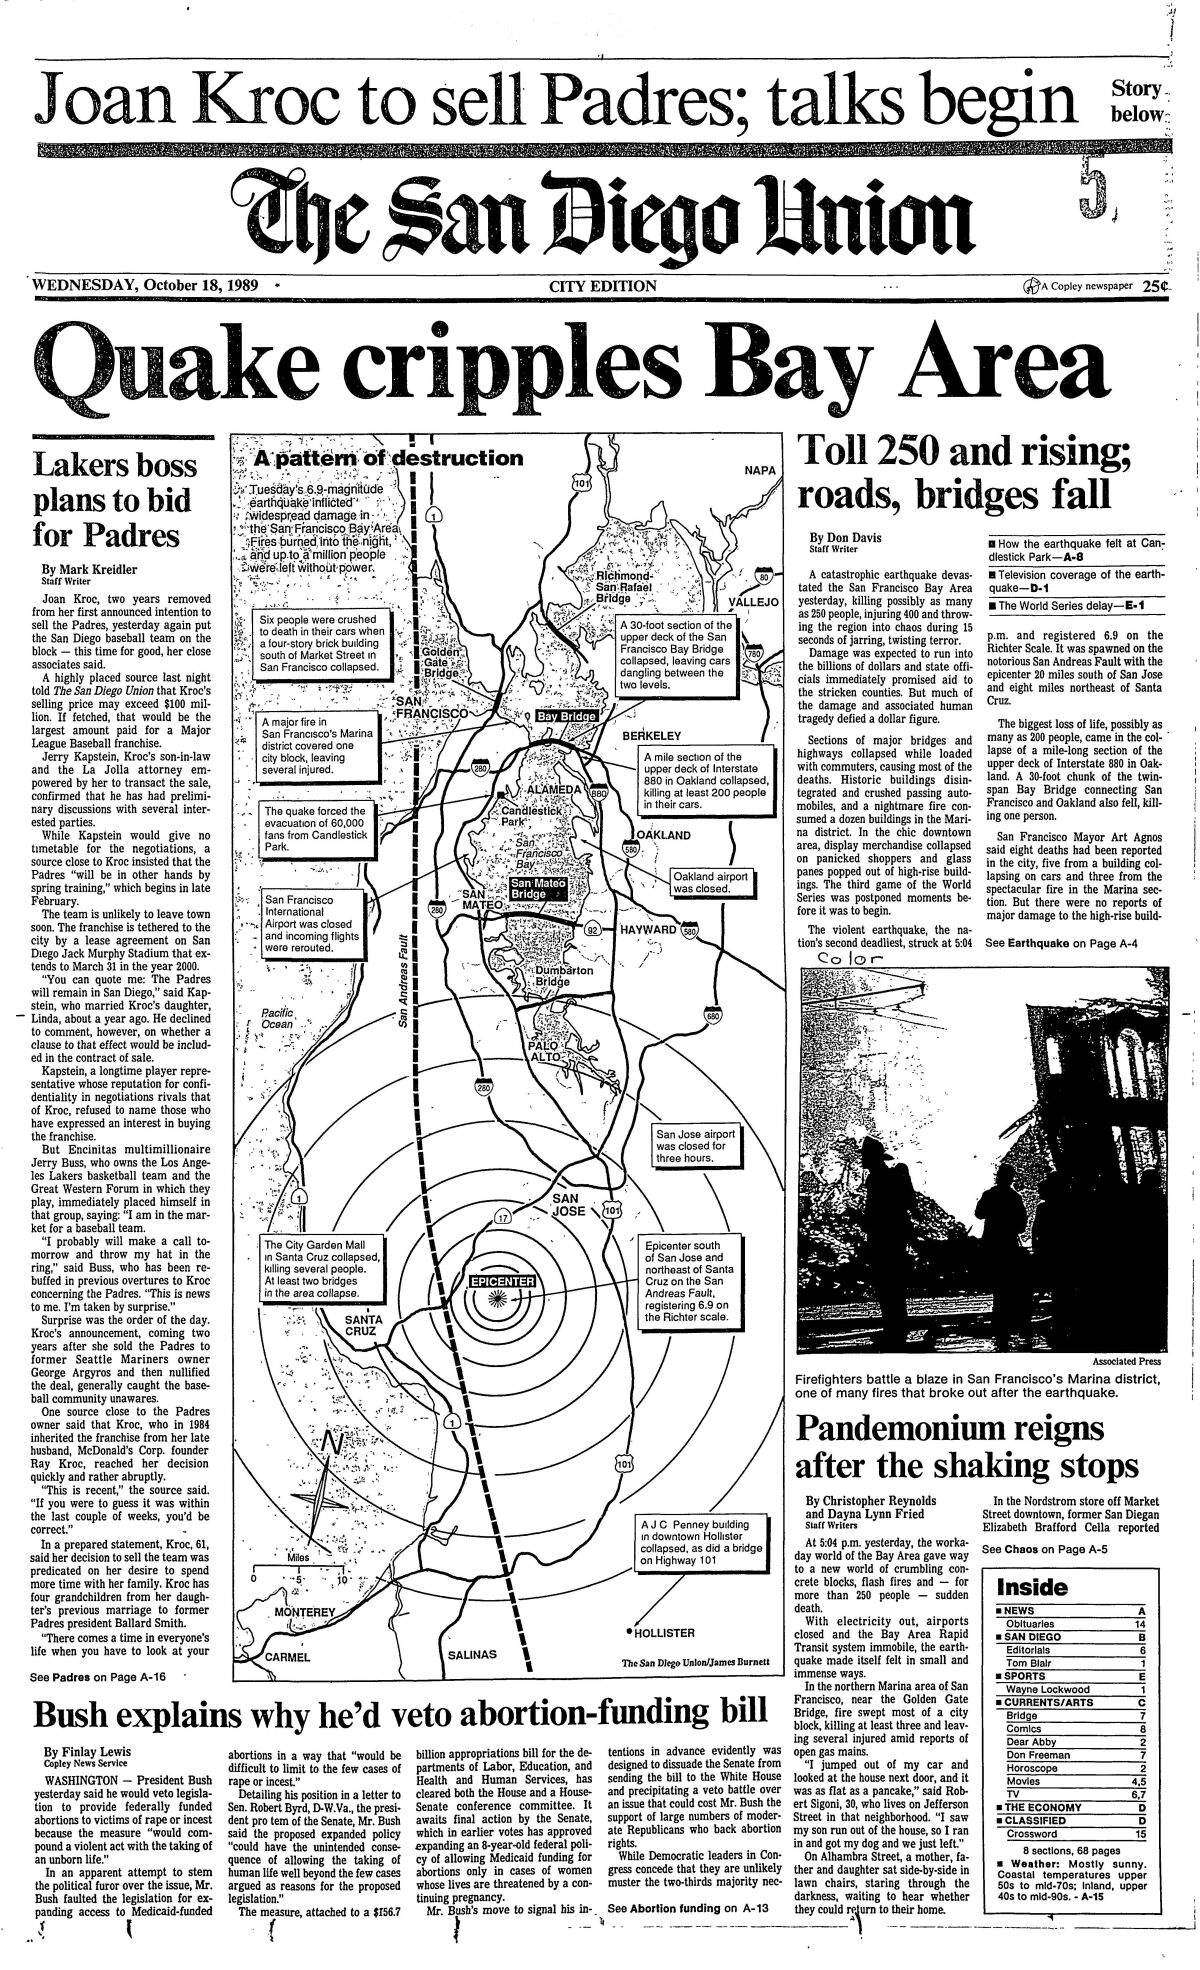 Front page of The San Diego Union, Oct. 18, 1989.